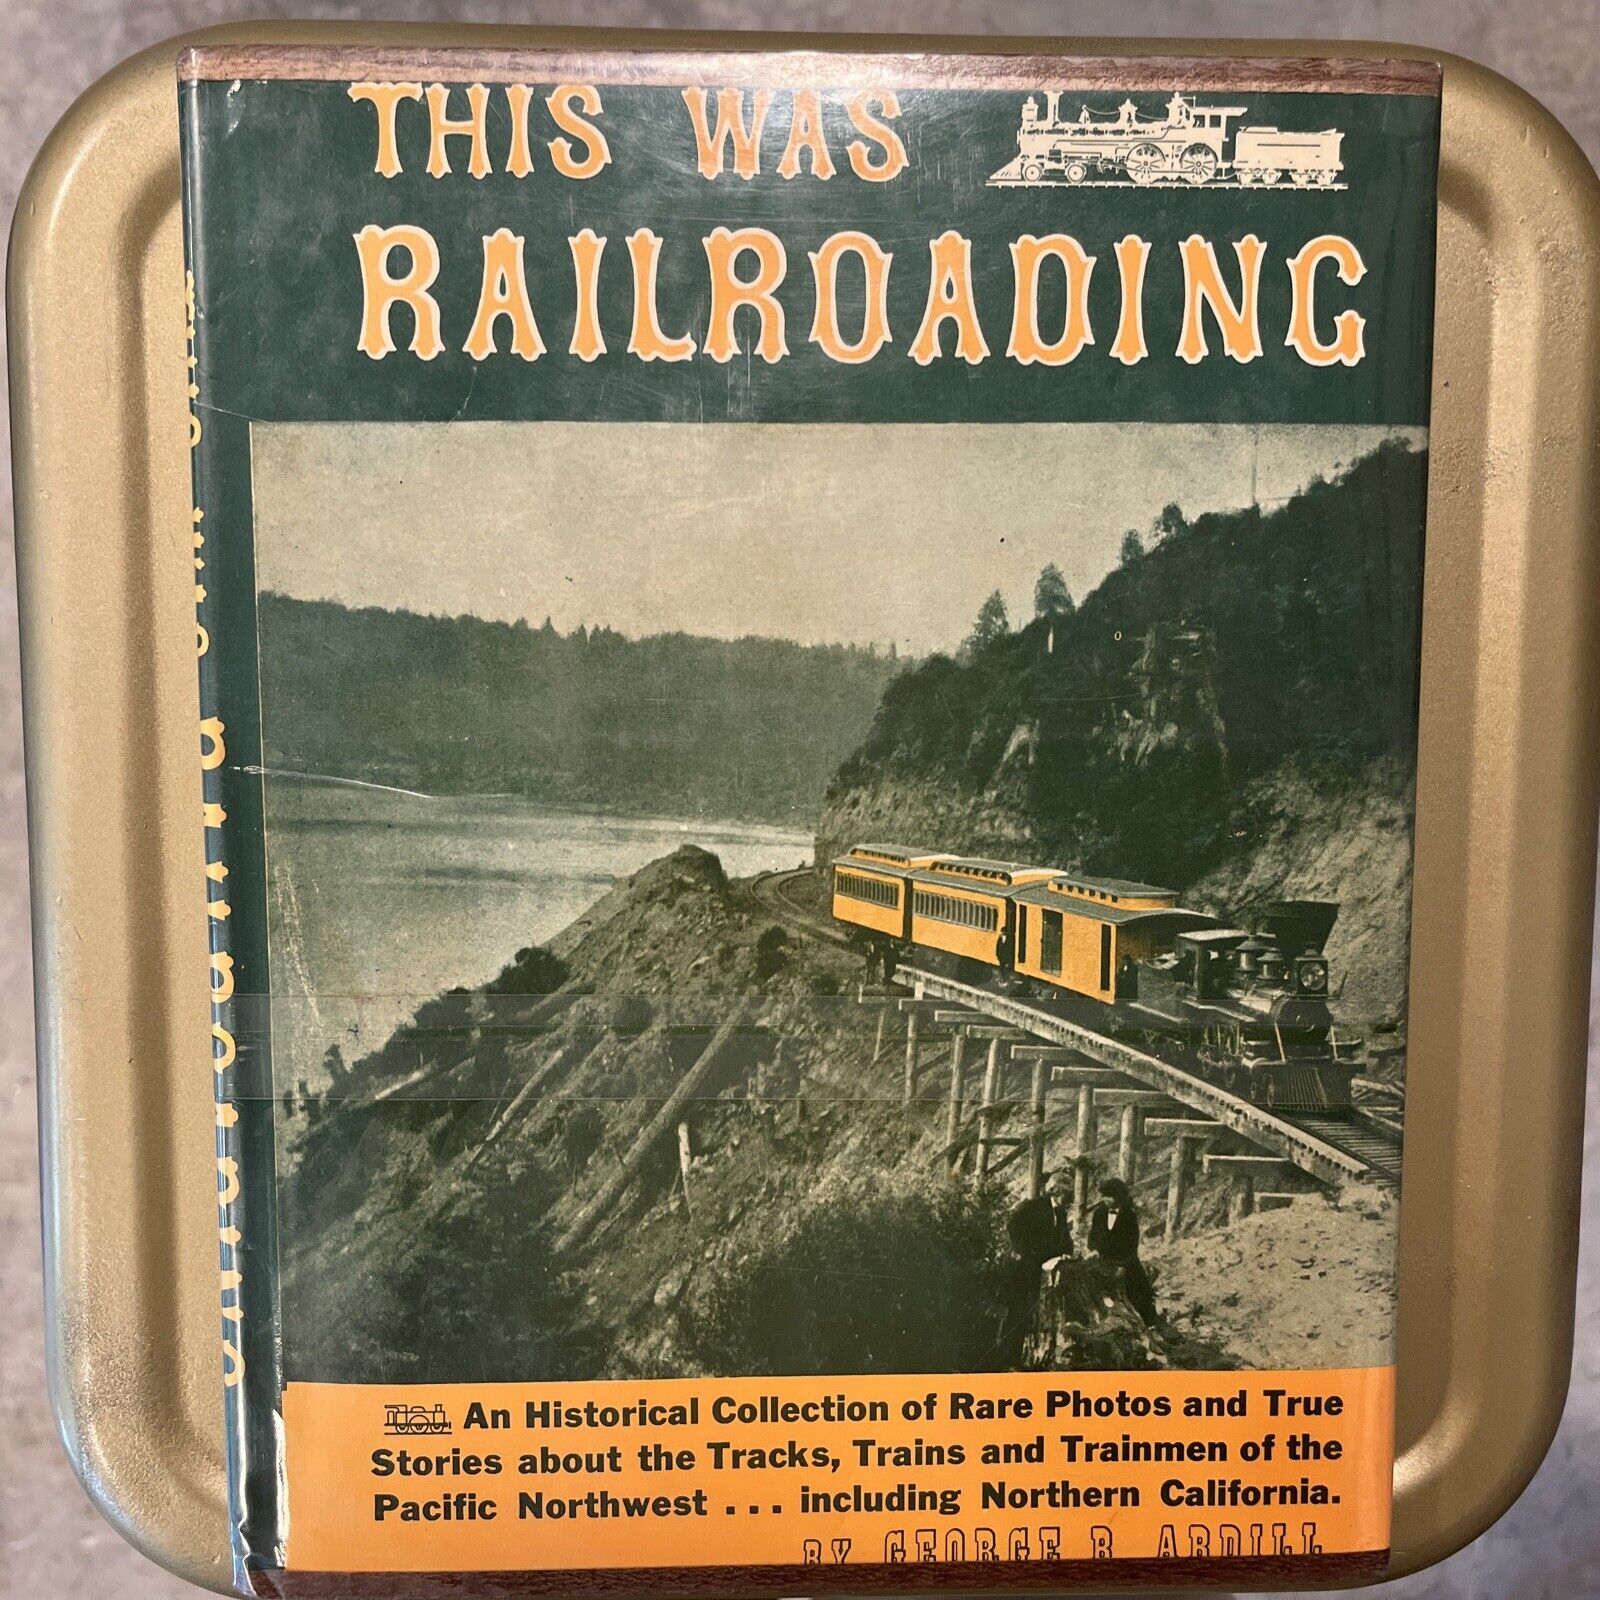 Railroad Book: This Was Railroading by George B. Abdill hardcover Dust jacket